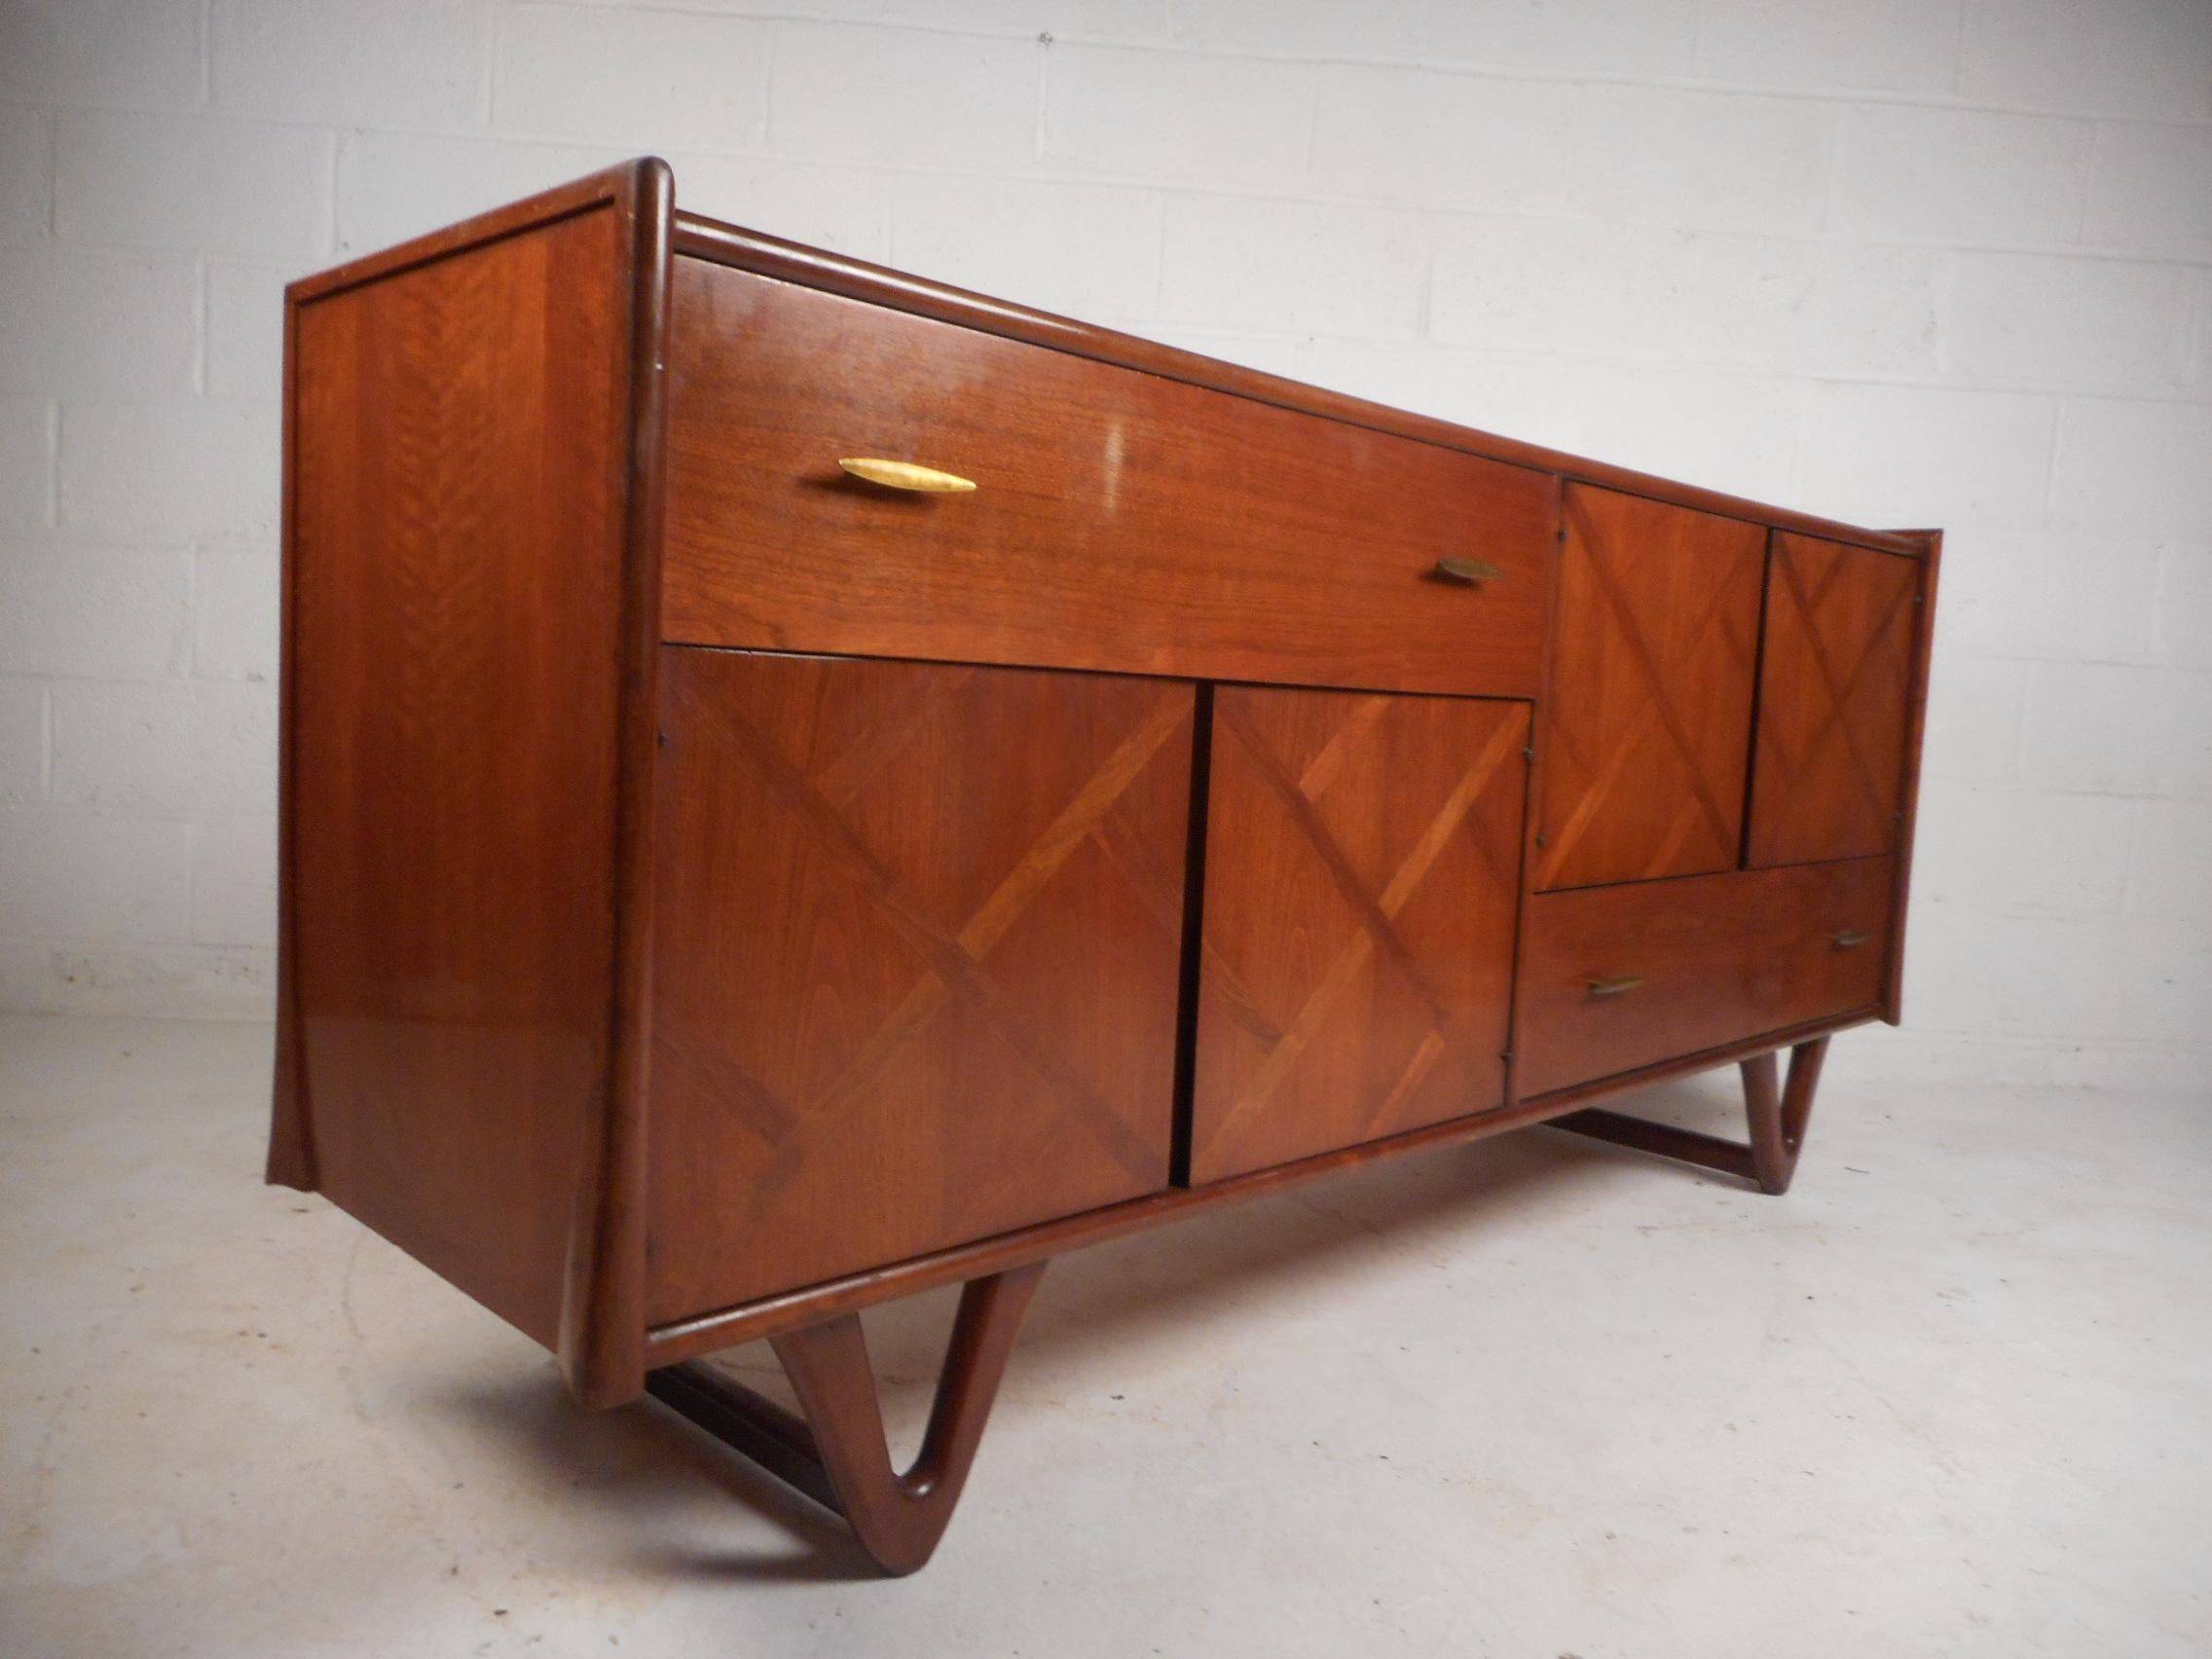 This amazing vintage modern low dresser is a sleek design with hairpin style wood sled legs and sculpted sides. This elegant piece of midcentury  furniture makes the perfect eye catching addition to any modern interior. Please confirm item location